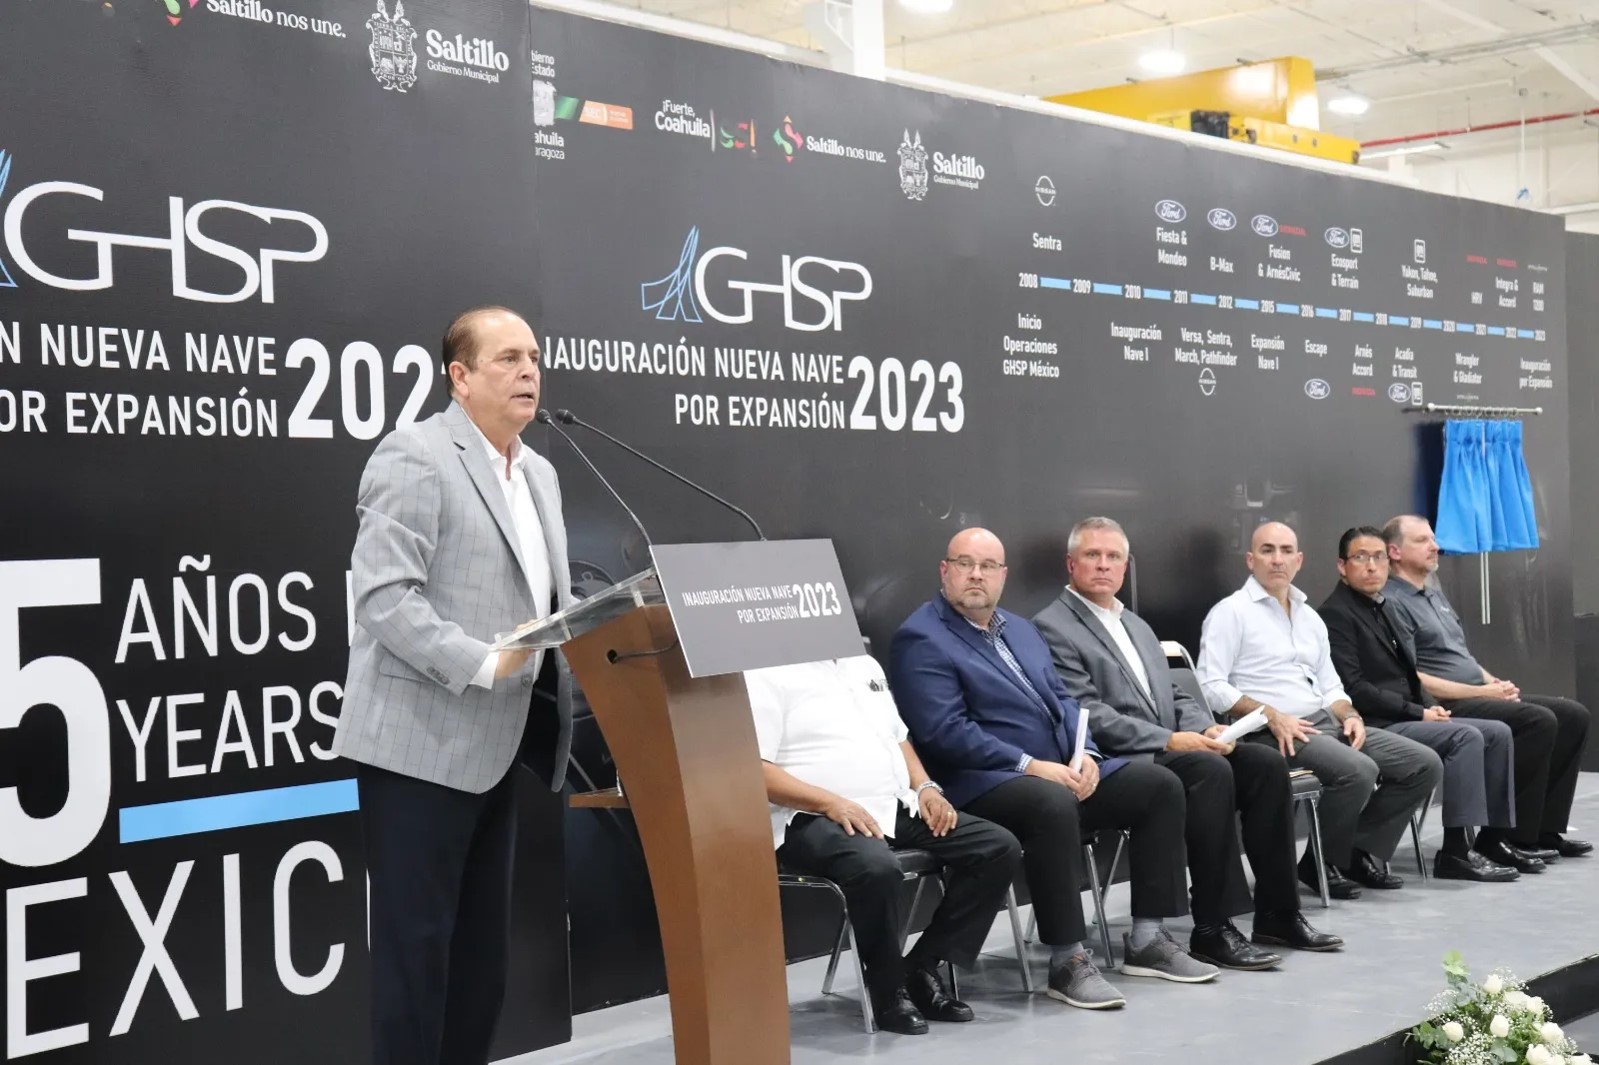 GHSP-Mexico begins expansion in Coahuila